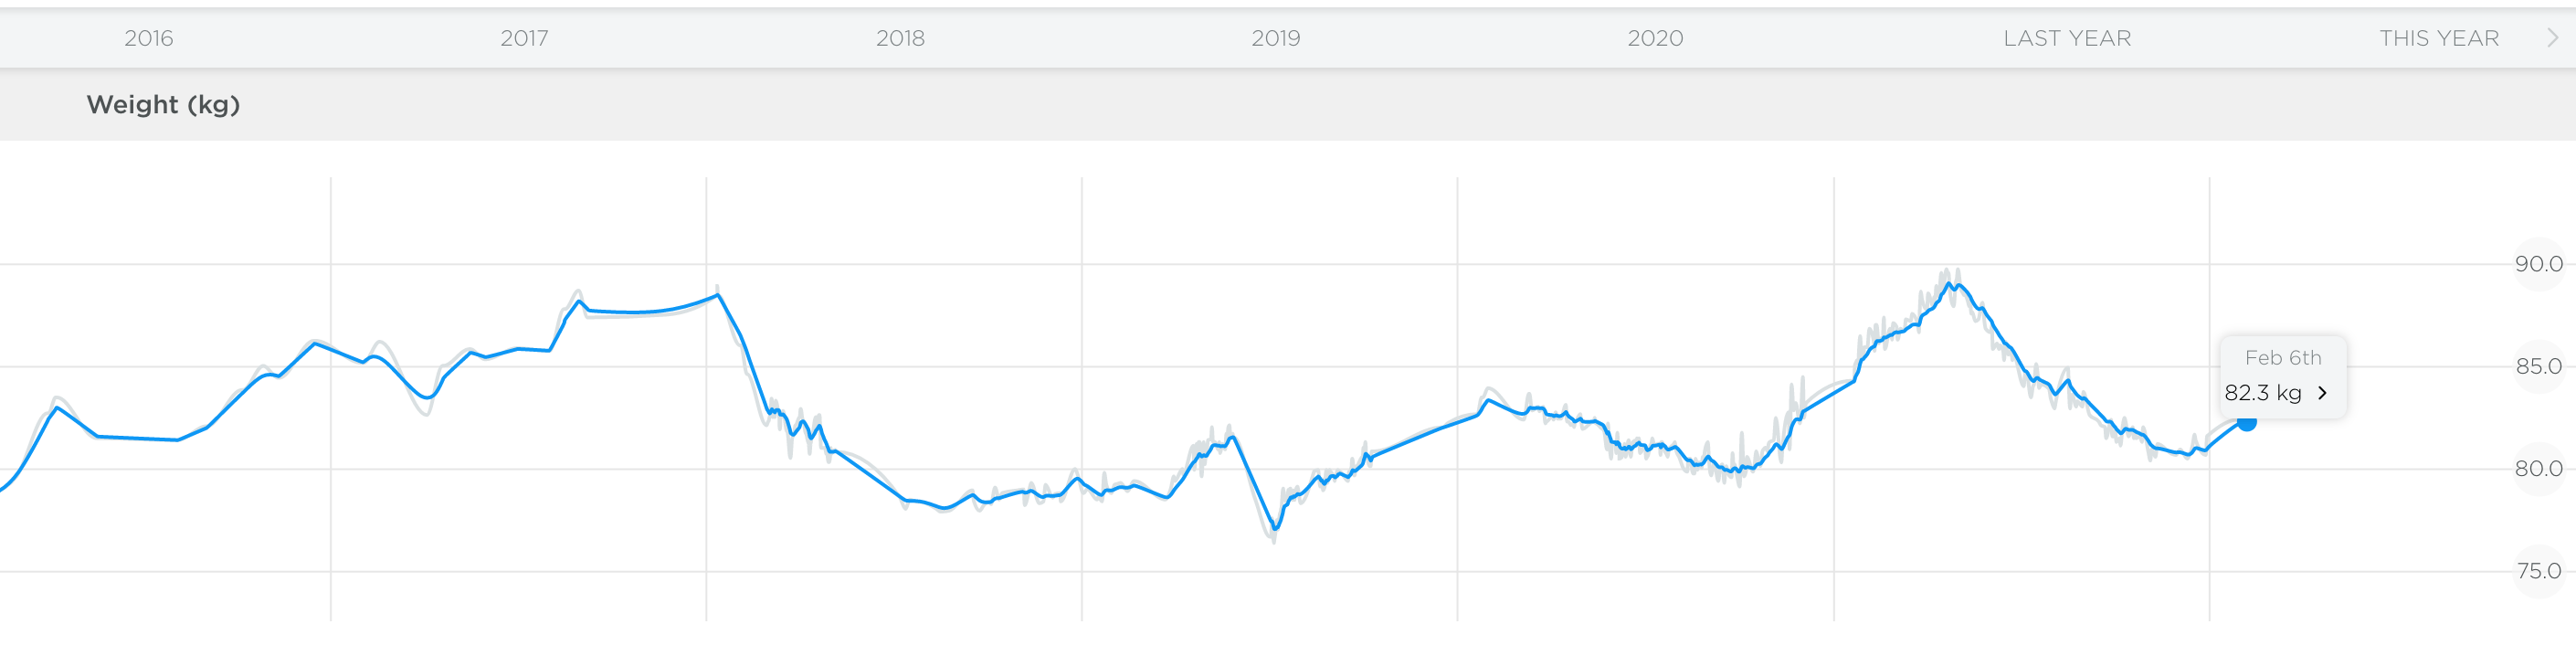 Weight History of 8 Years